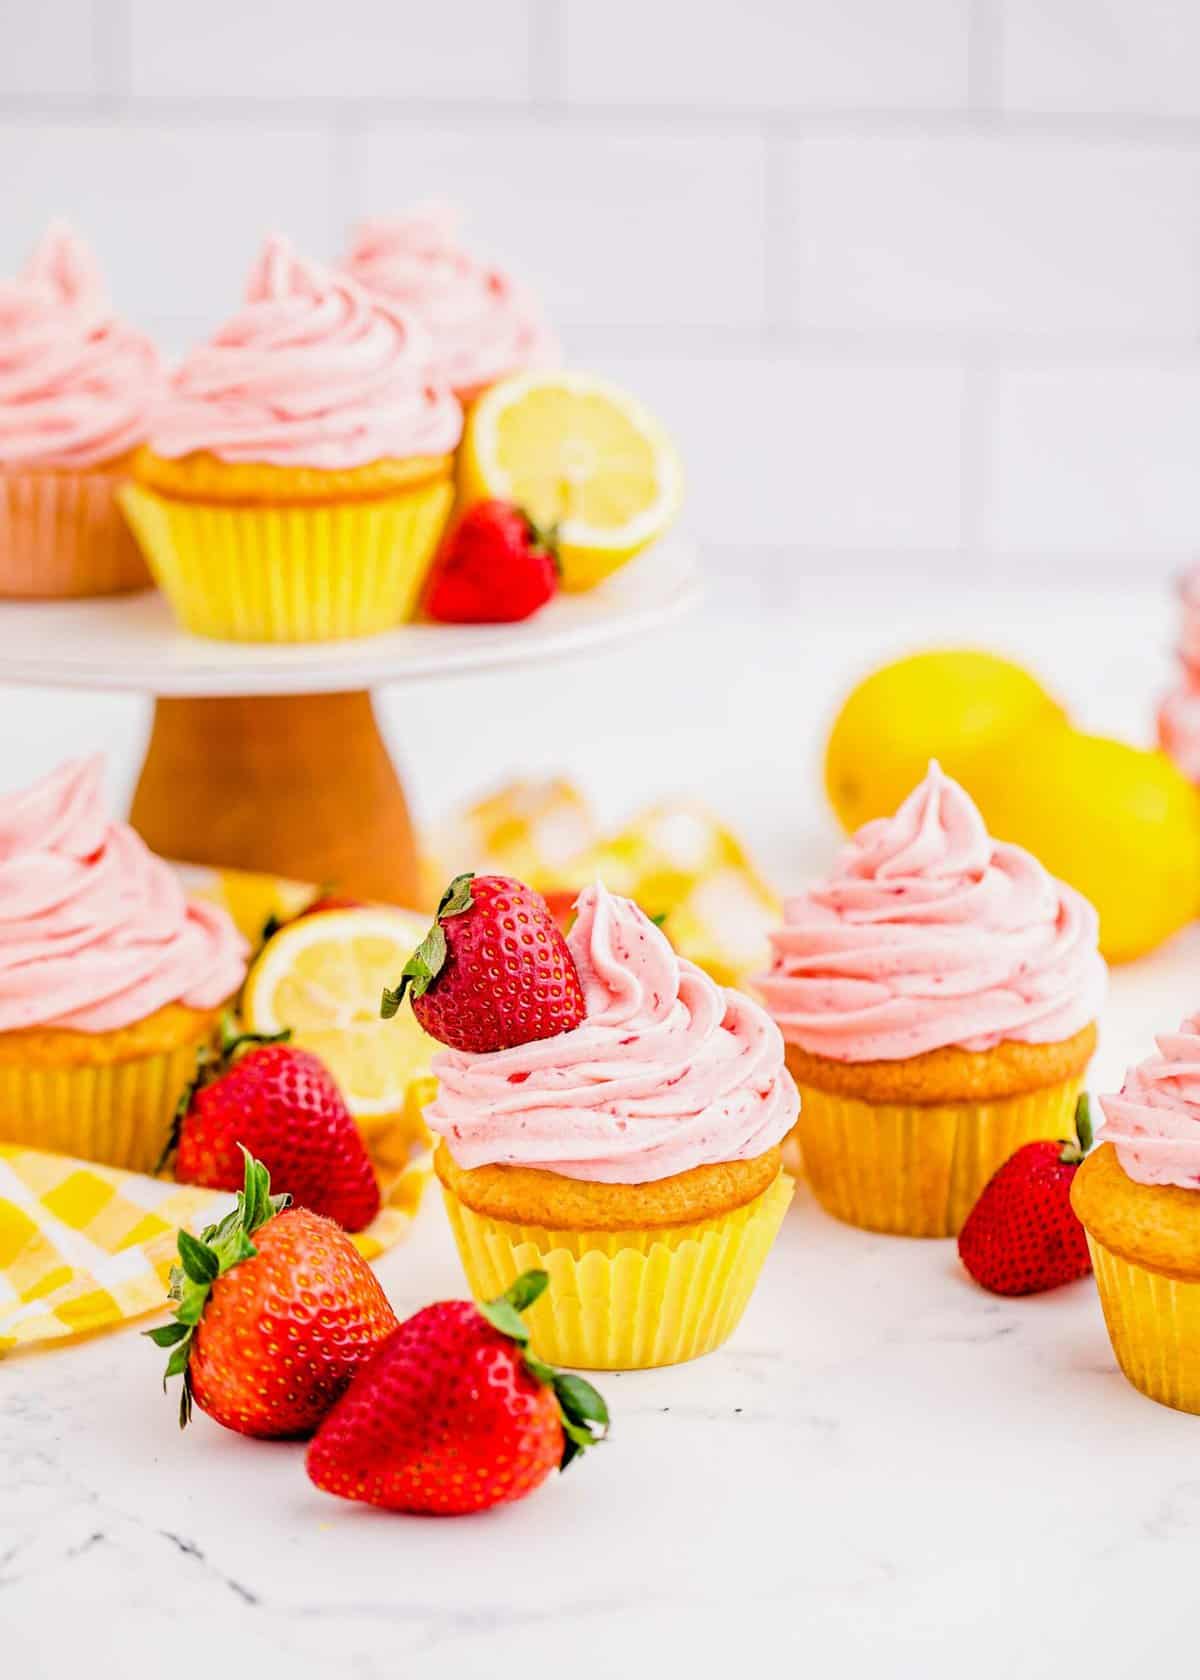 Strawberry lemonade cupcakes on countertop and cake stand, with fresh strawberries